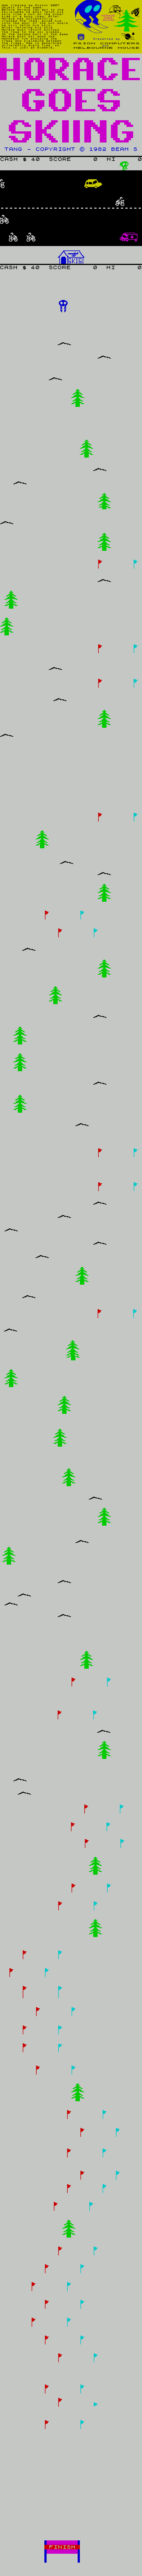 Horace Goes Skiing Game Map